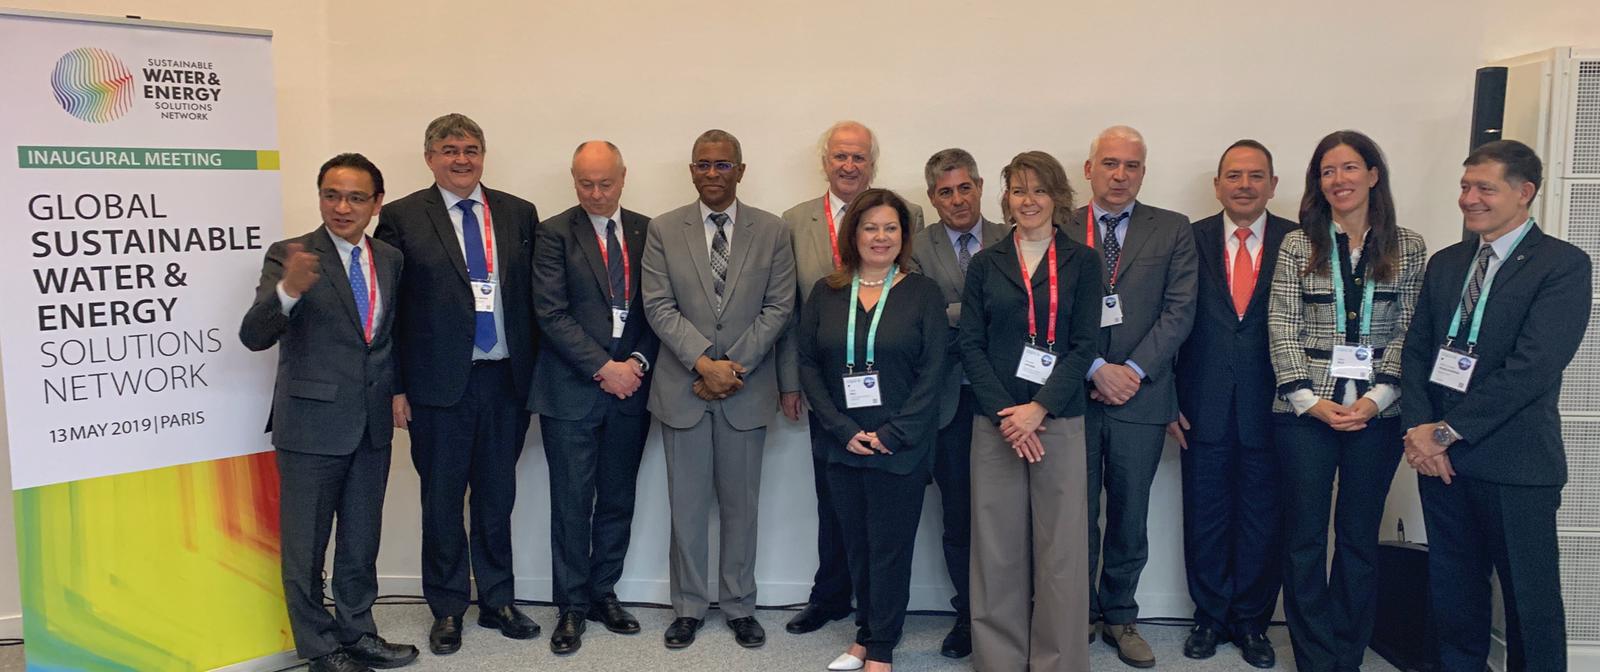 Inaugural Meeting of the Global Sustainable Water and Energy Solutions Network